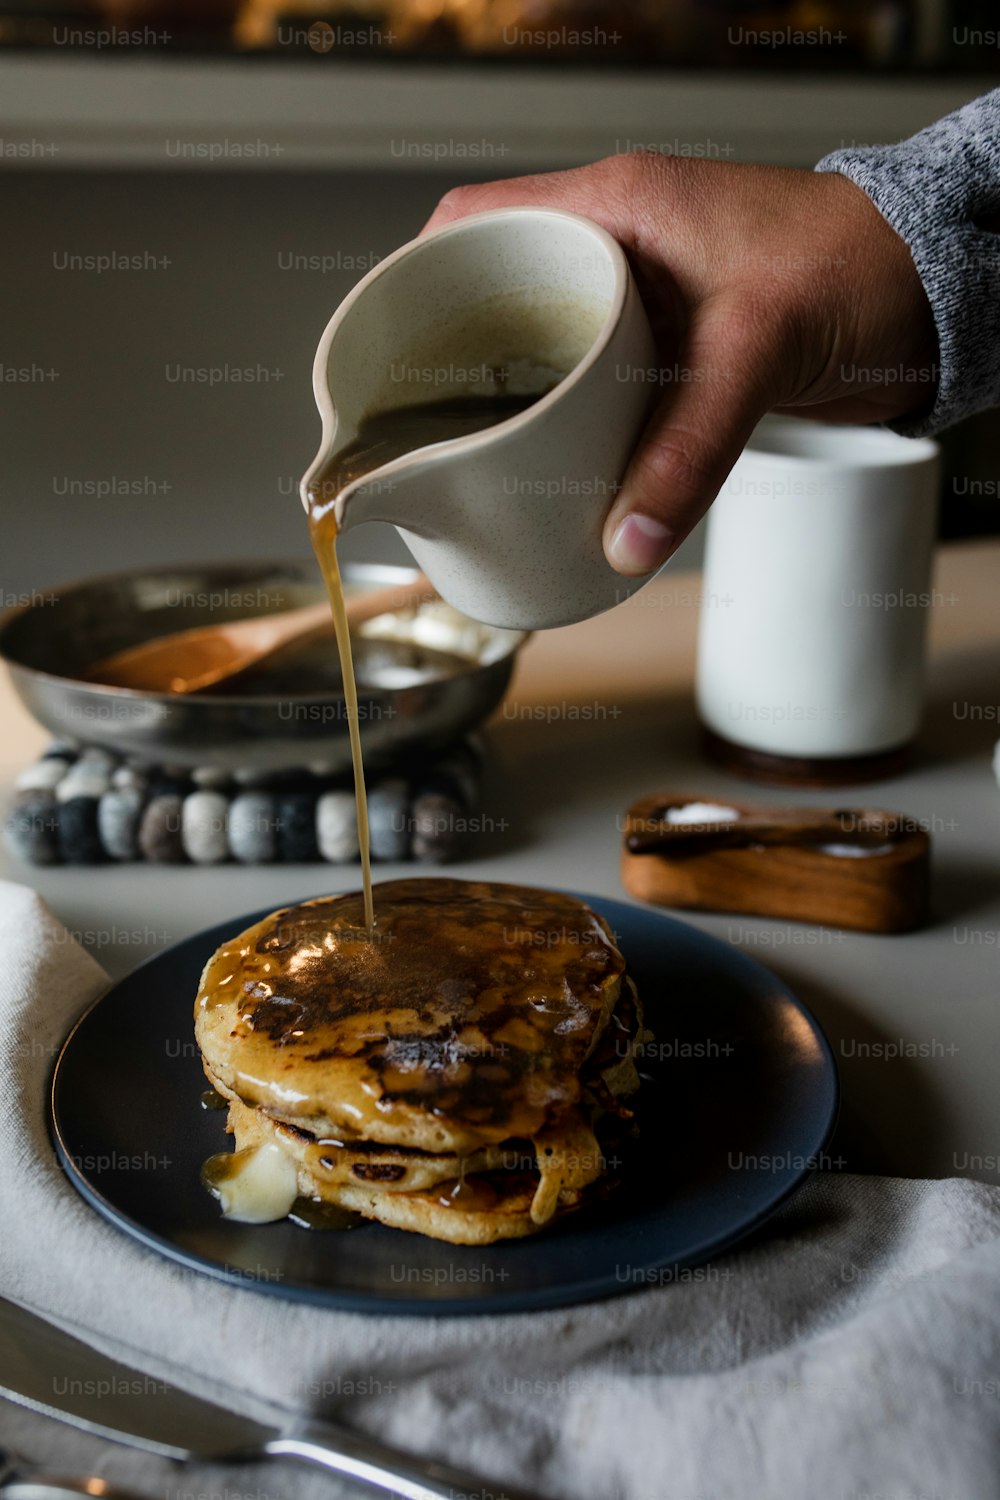 a person pouring syrup on a stack of pancakes